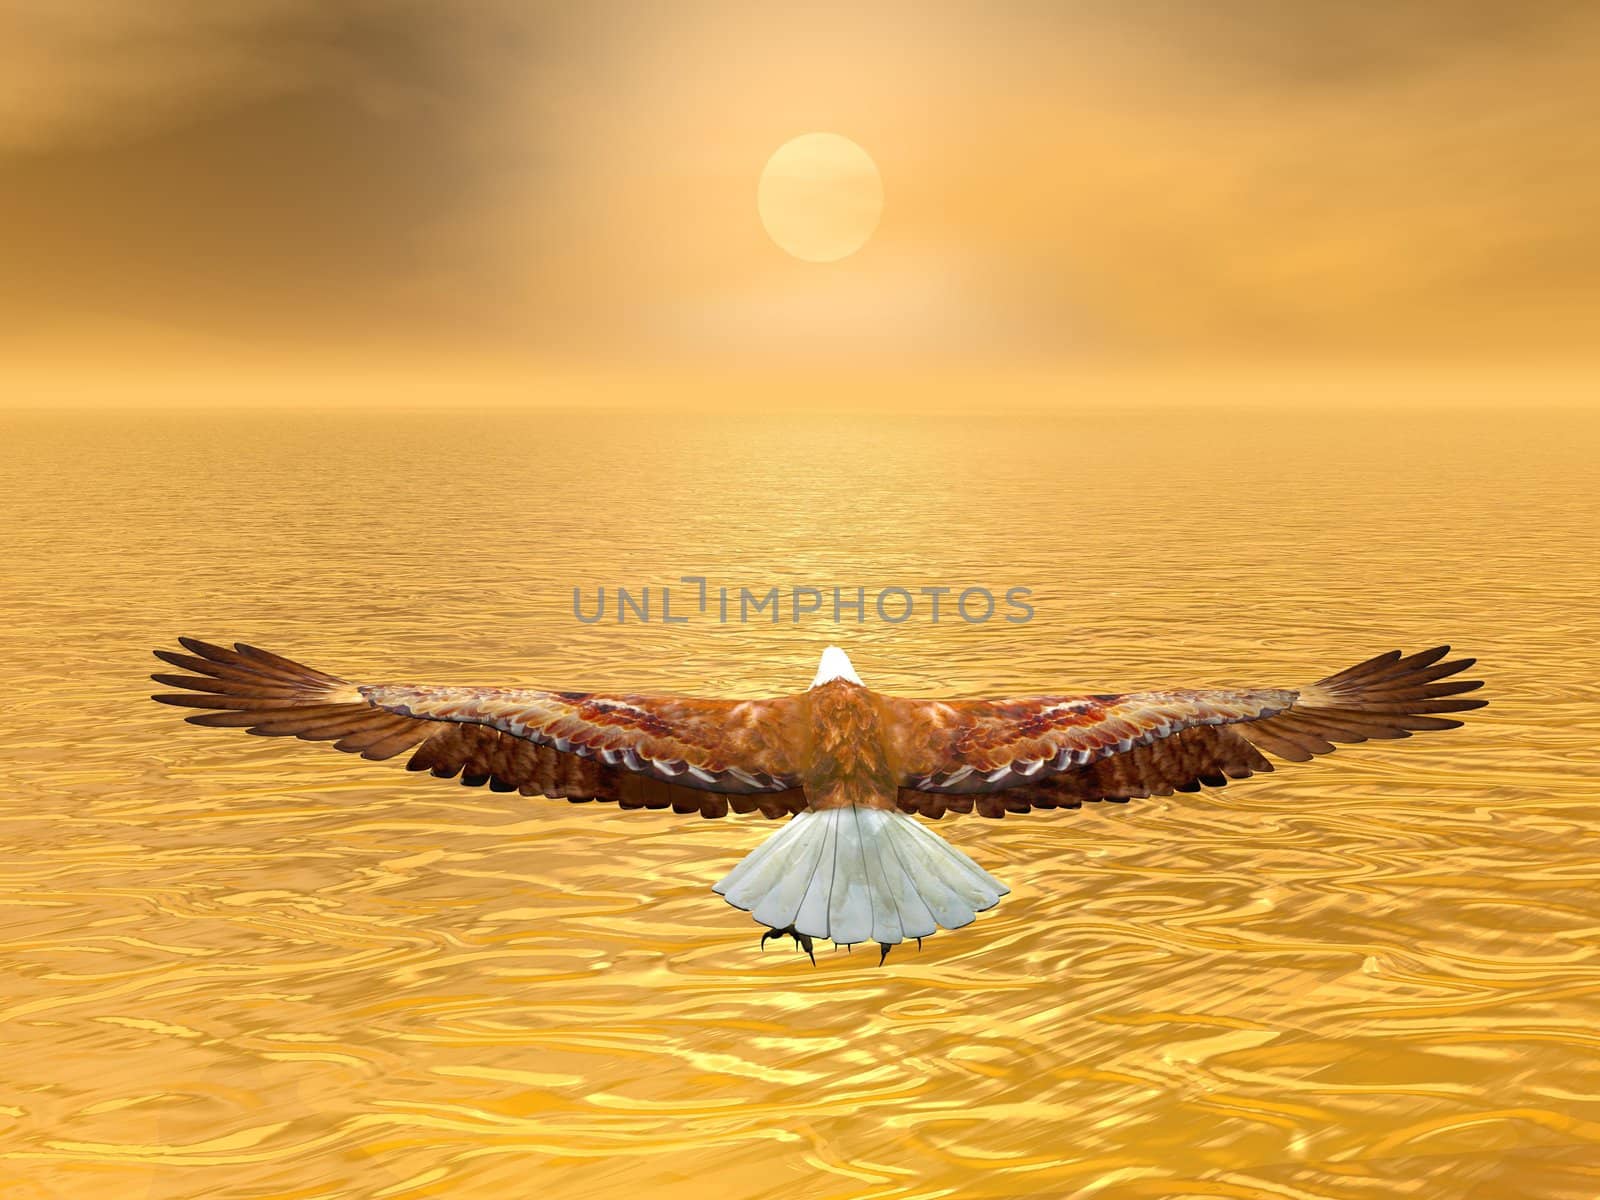 Eagle flying to the sun by brown sunset over the ocean